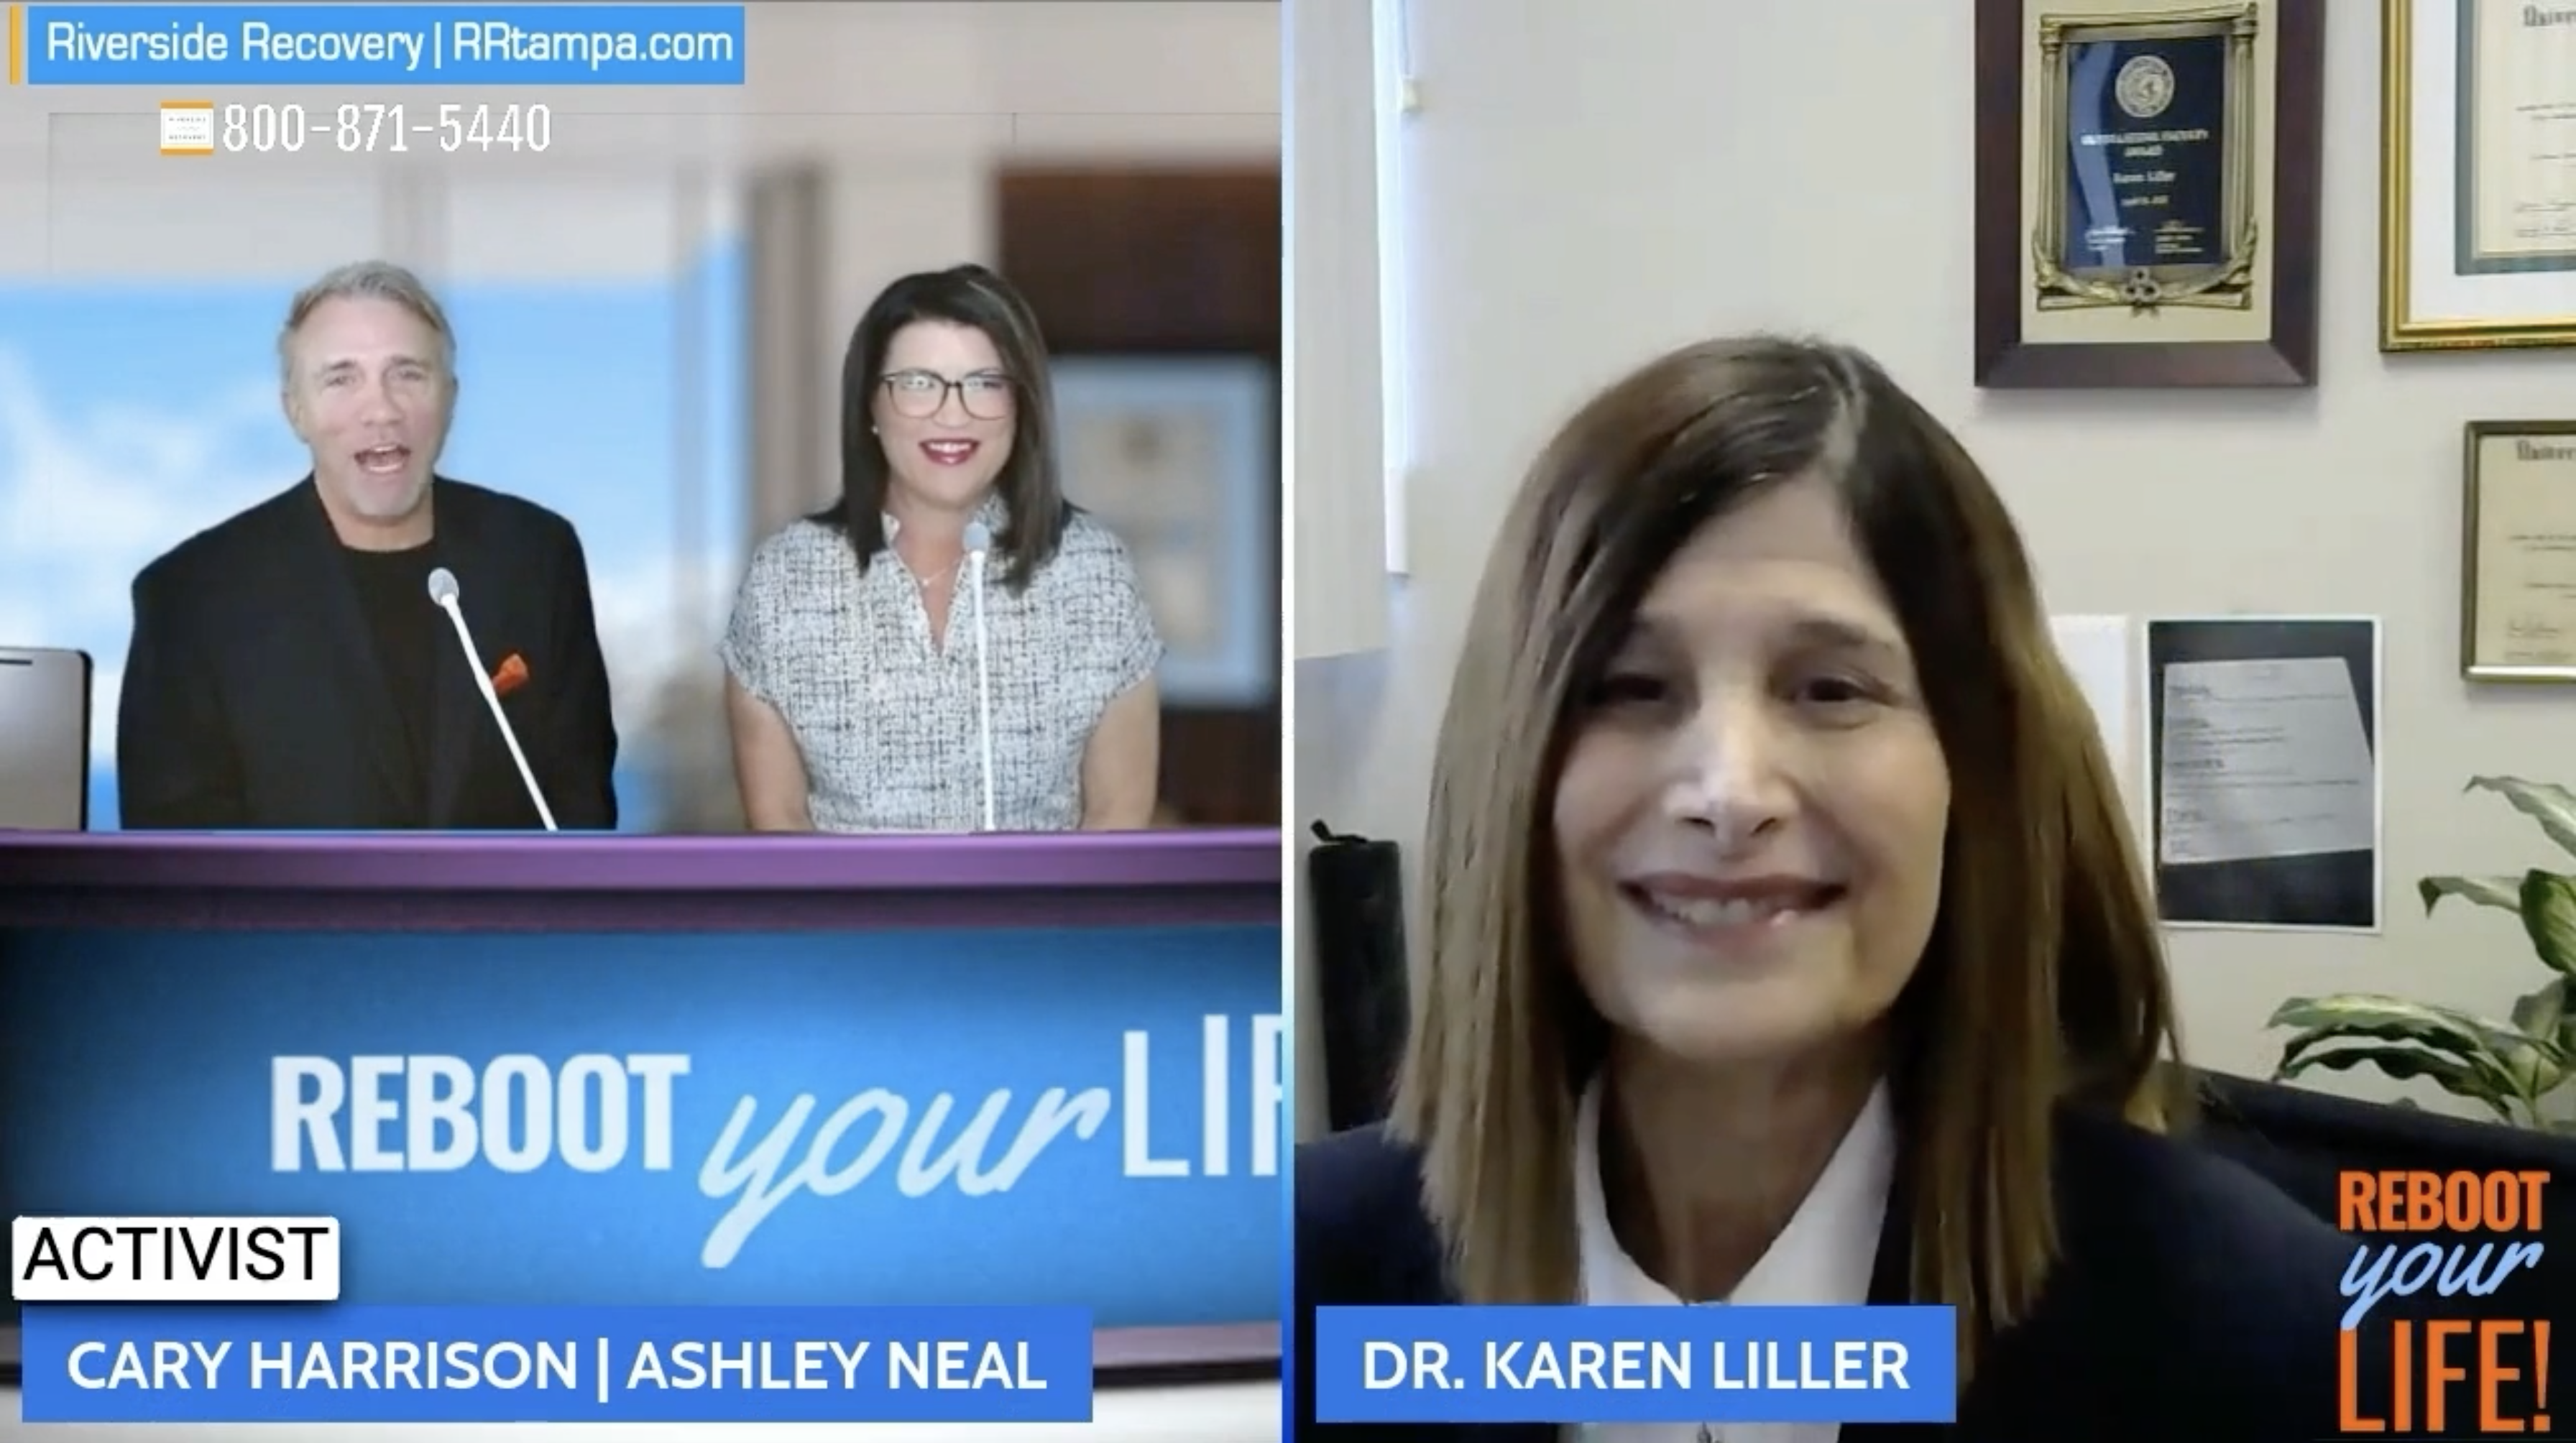 A screencap from the Reboot Your Life! podcast featuring Dr. Karen Liller smiling at the camera